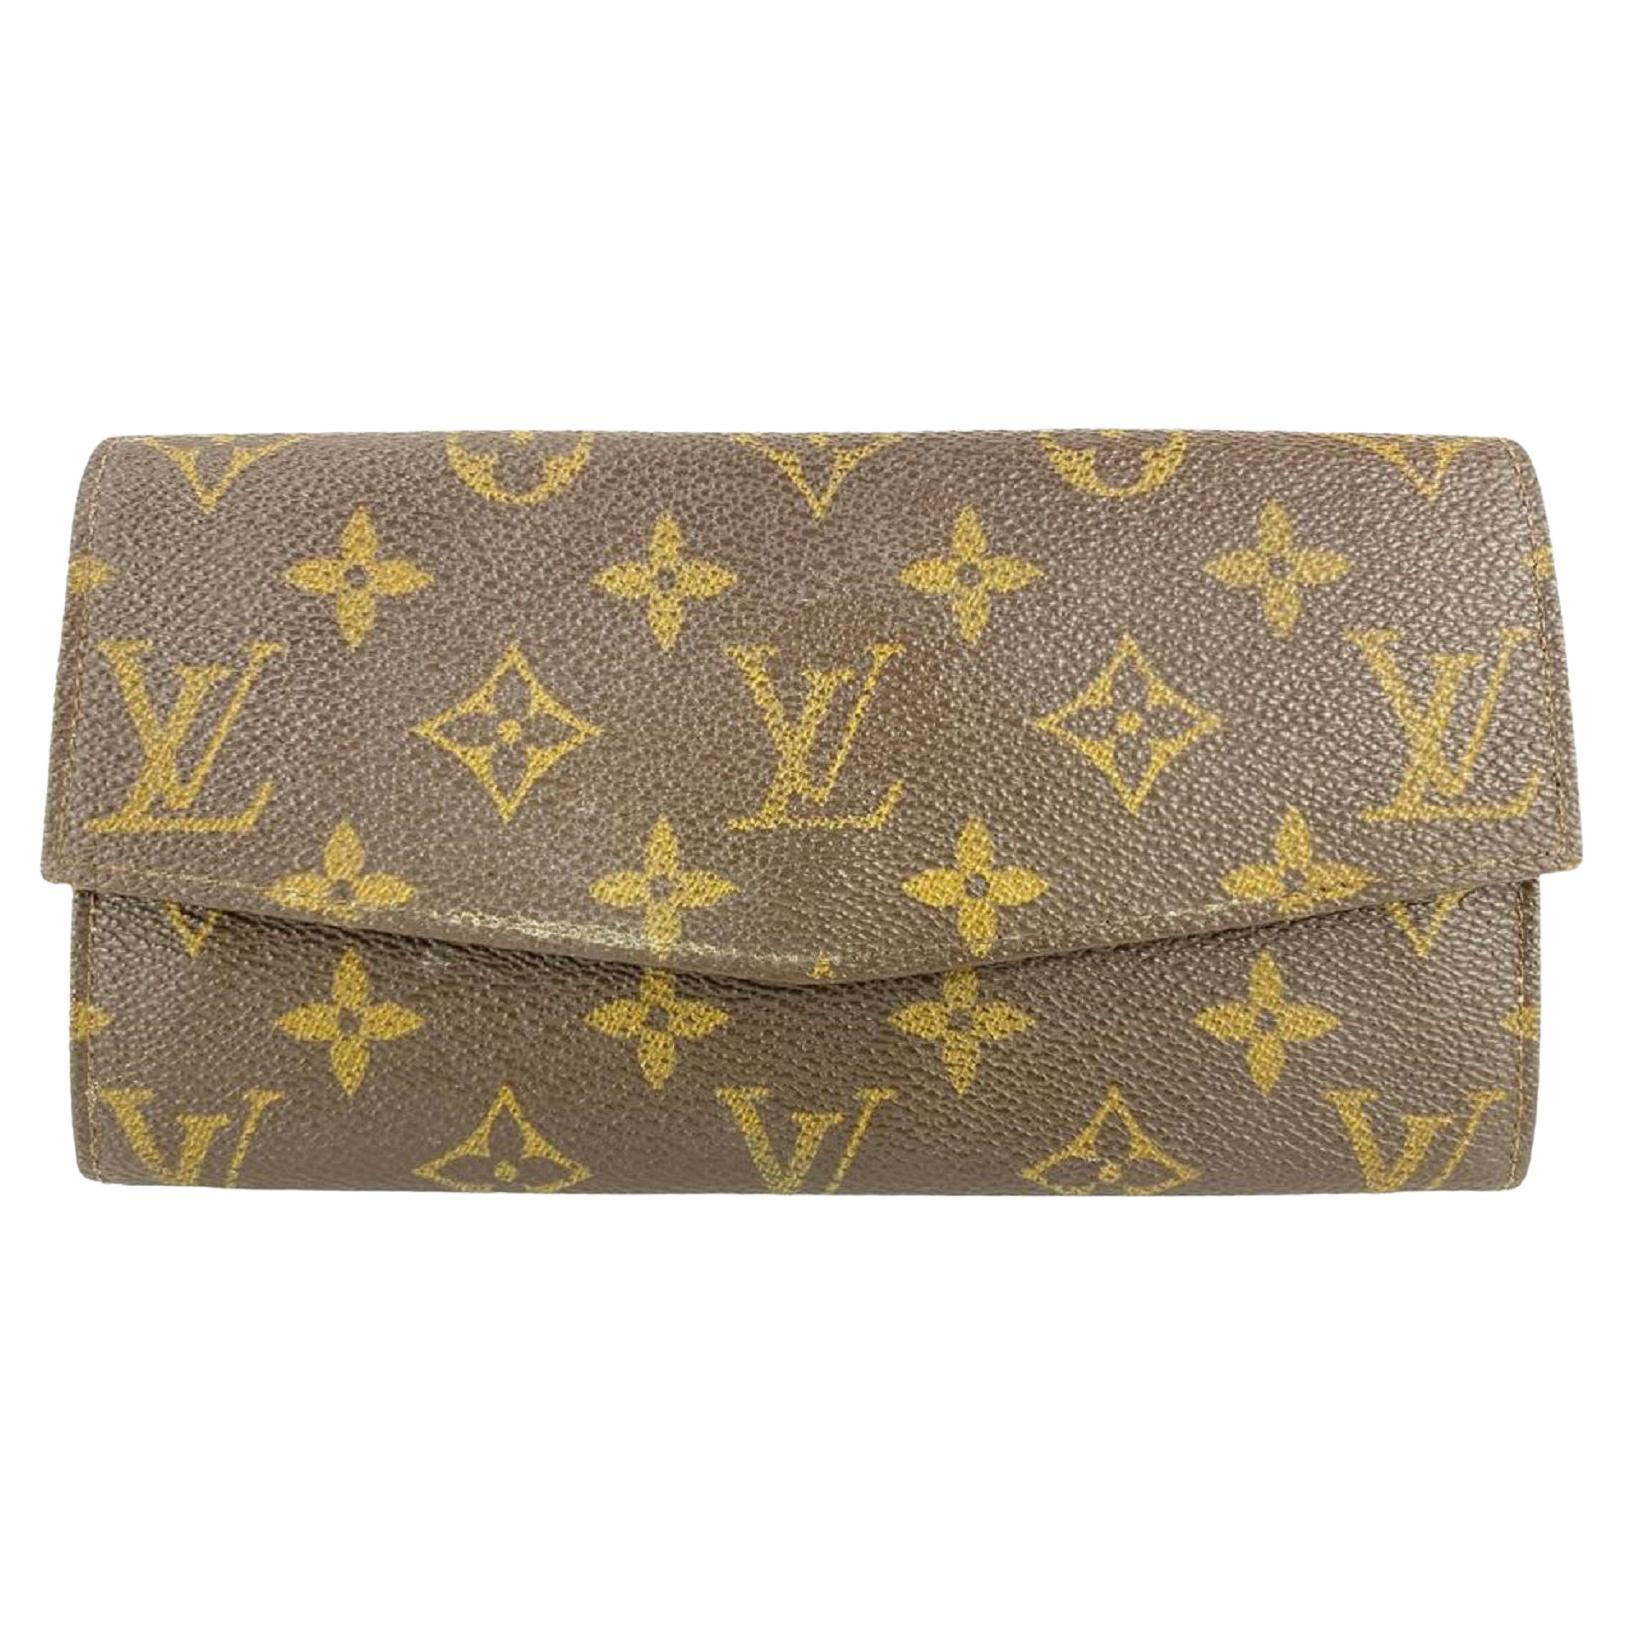 Vintage Louis Vuitton Wallet - 7 For Sale on 1stDibs